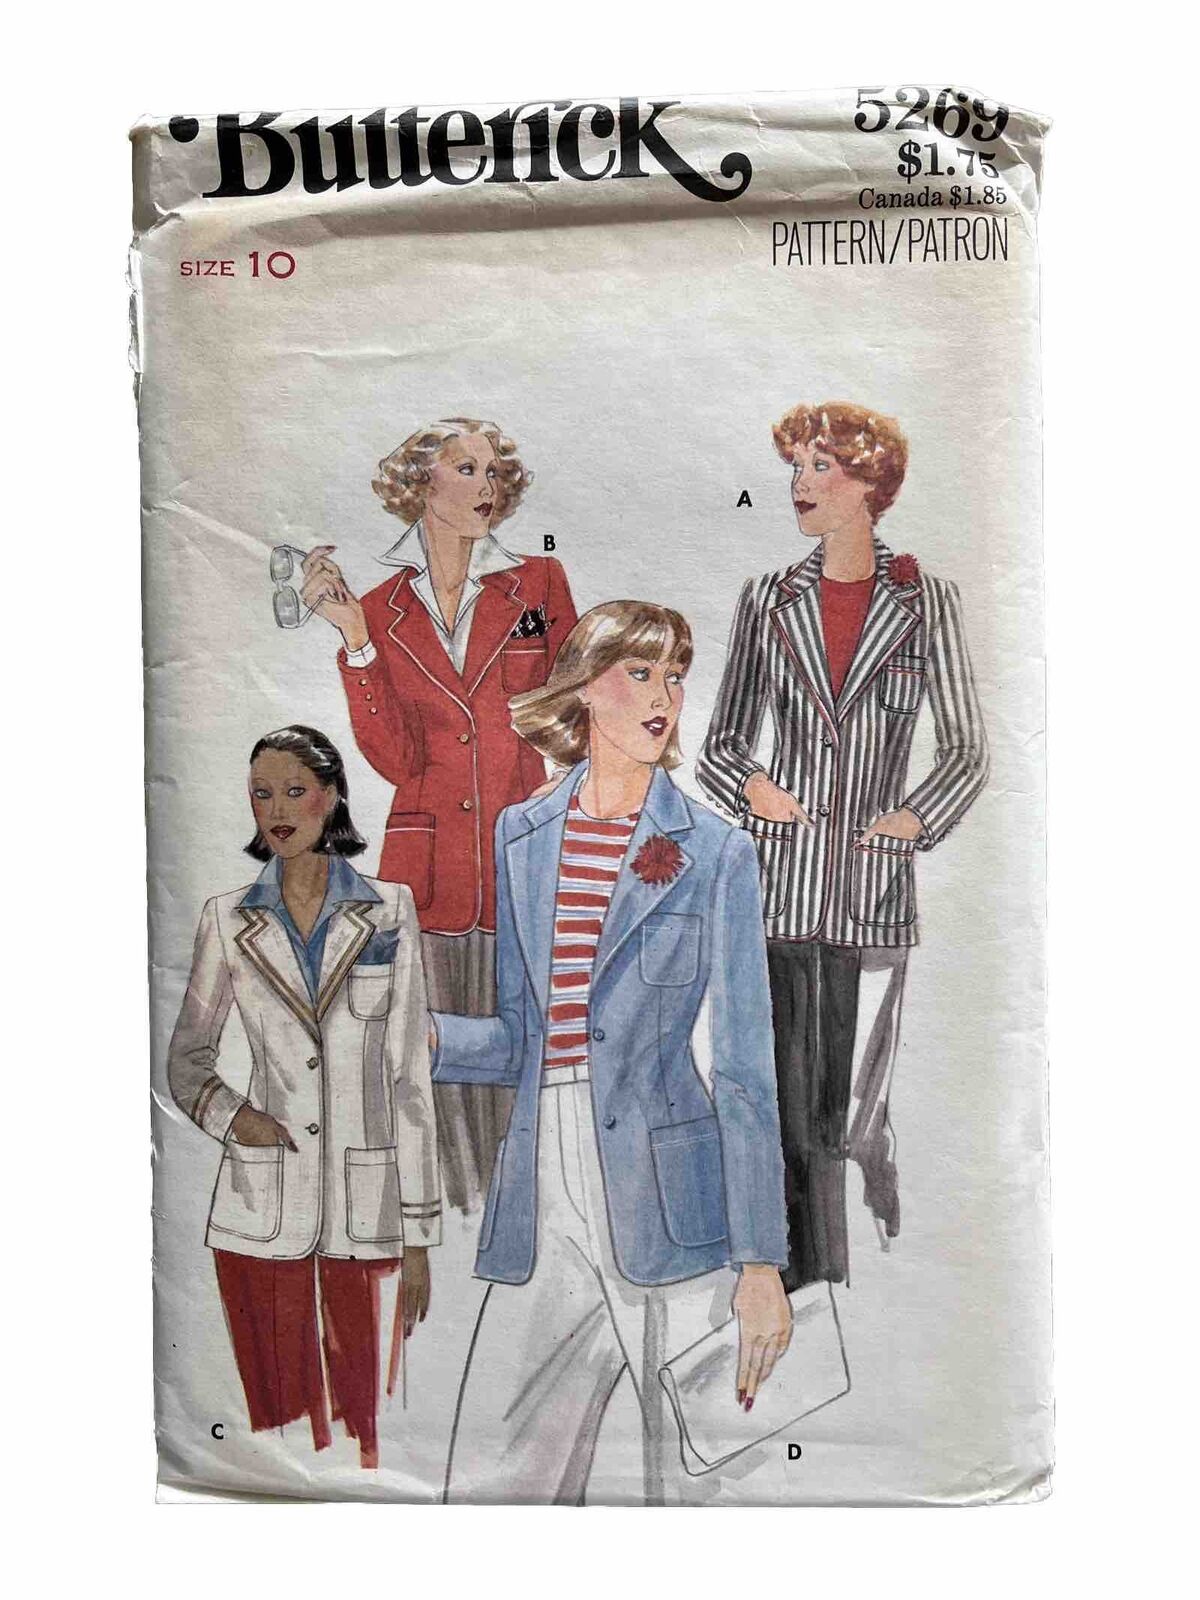 Butterick 5269 Lined Fitted Jacket Blazer Pockets Size 10 Bust 32.5  Uncut